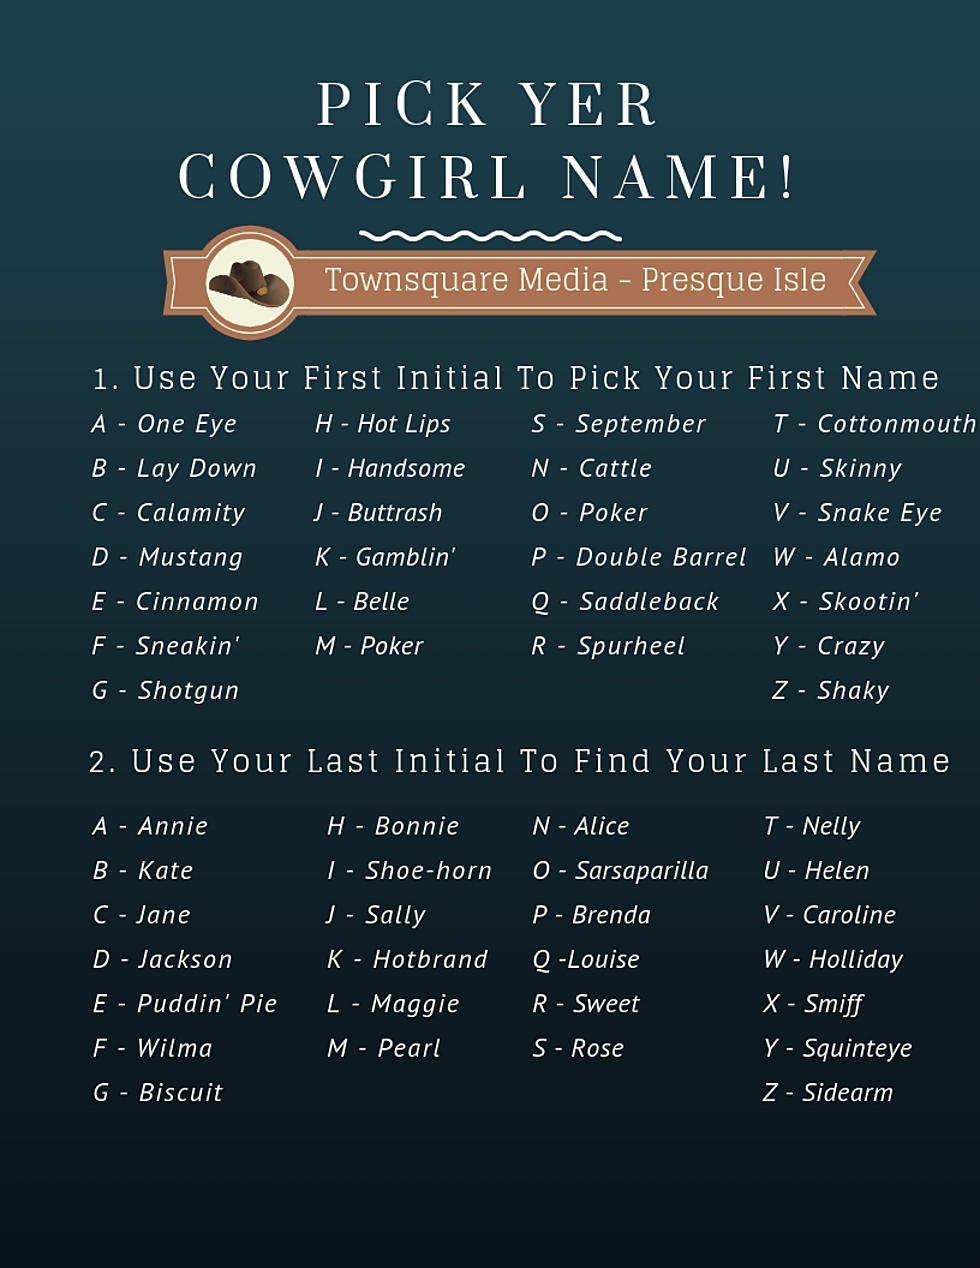 Find Your Cowgirl Name Here Just In Time For Boots N’ Bulls!